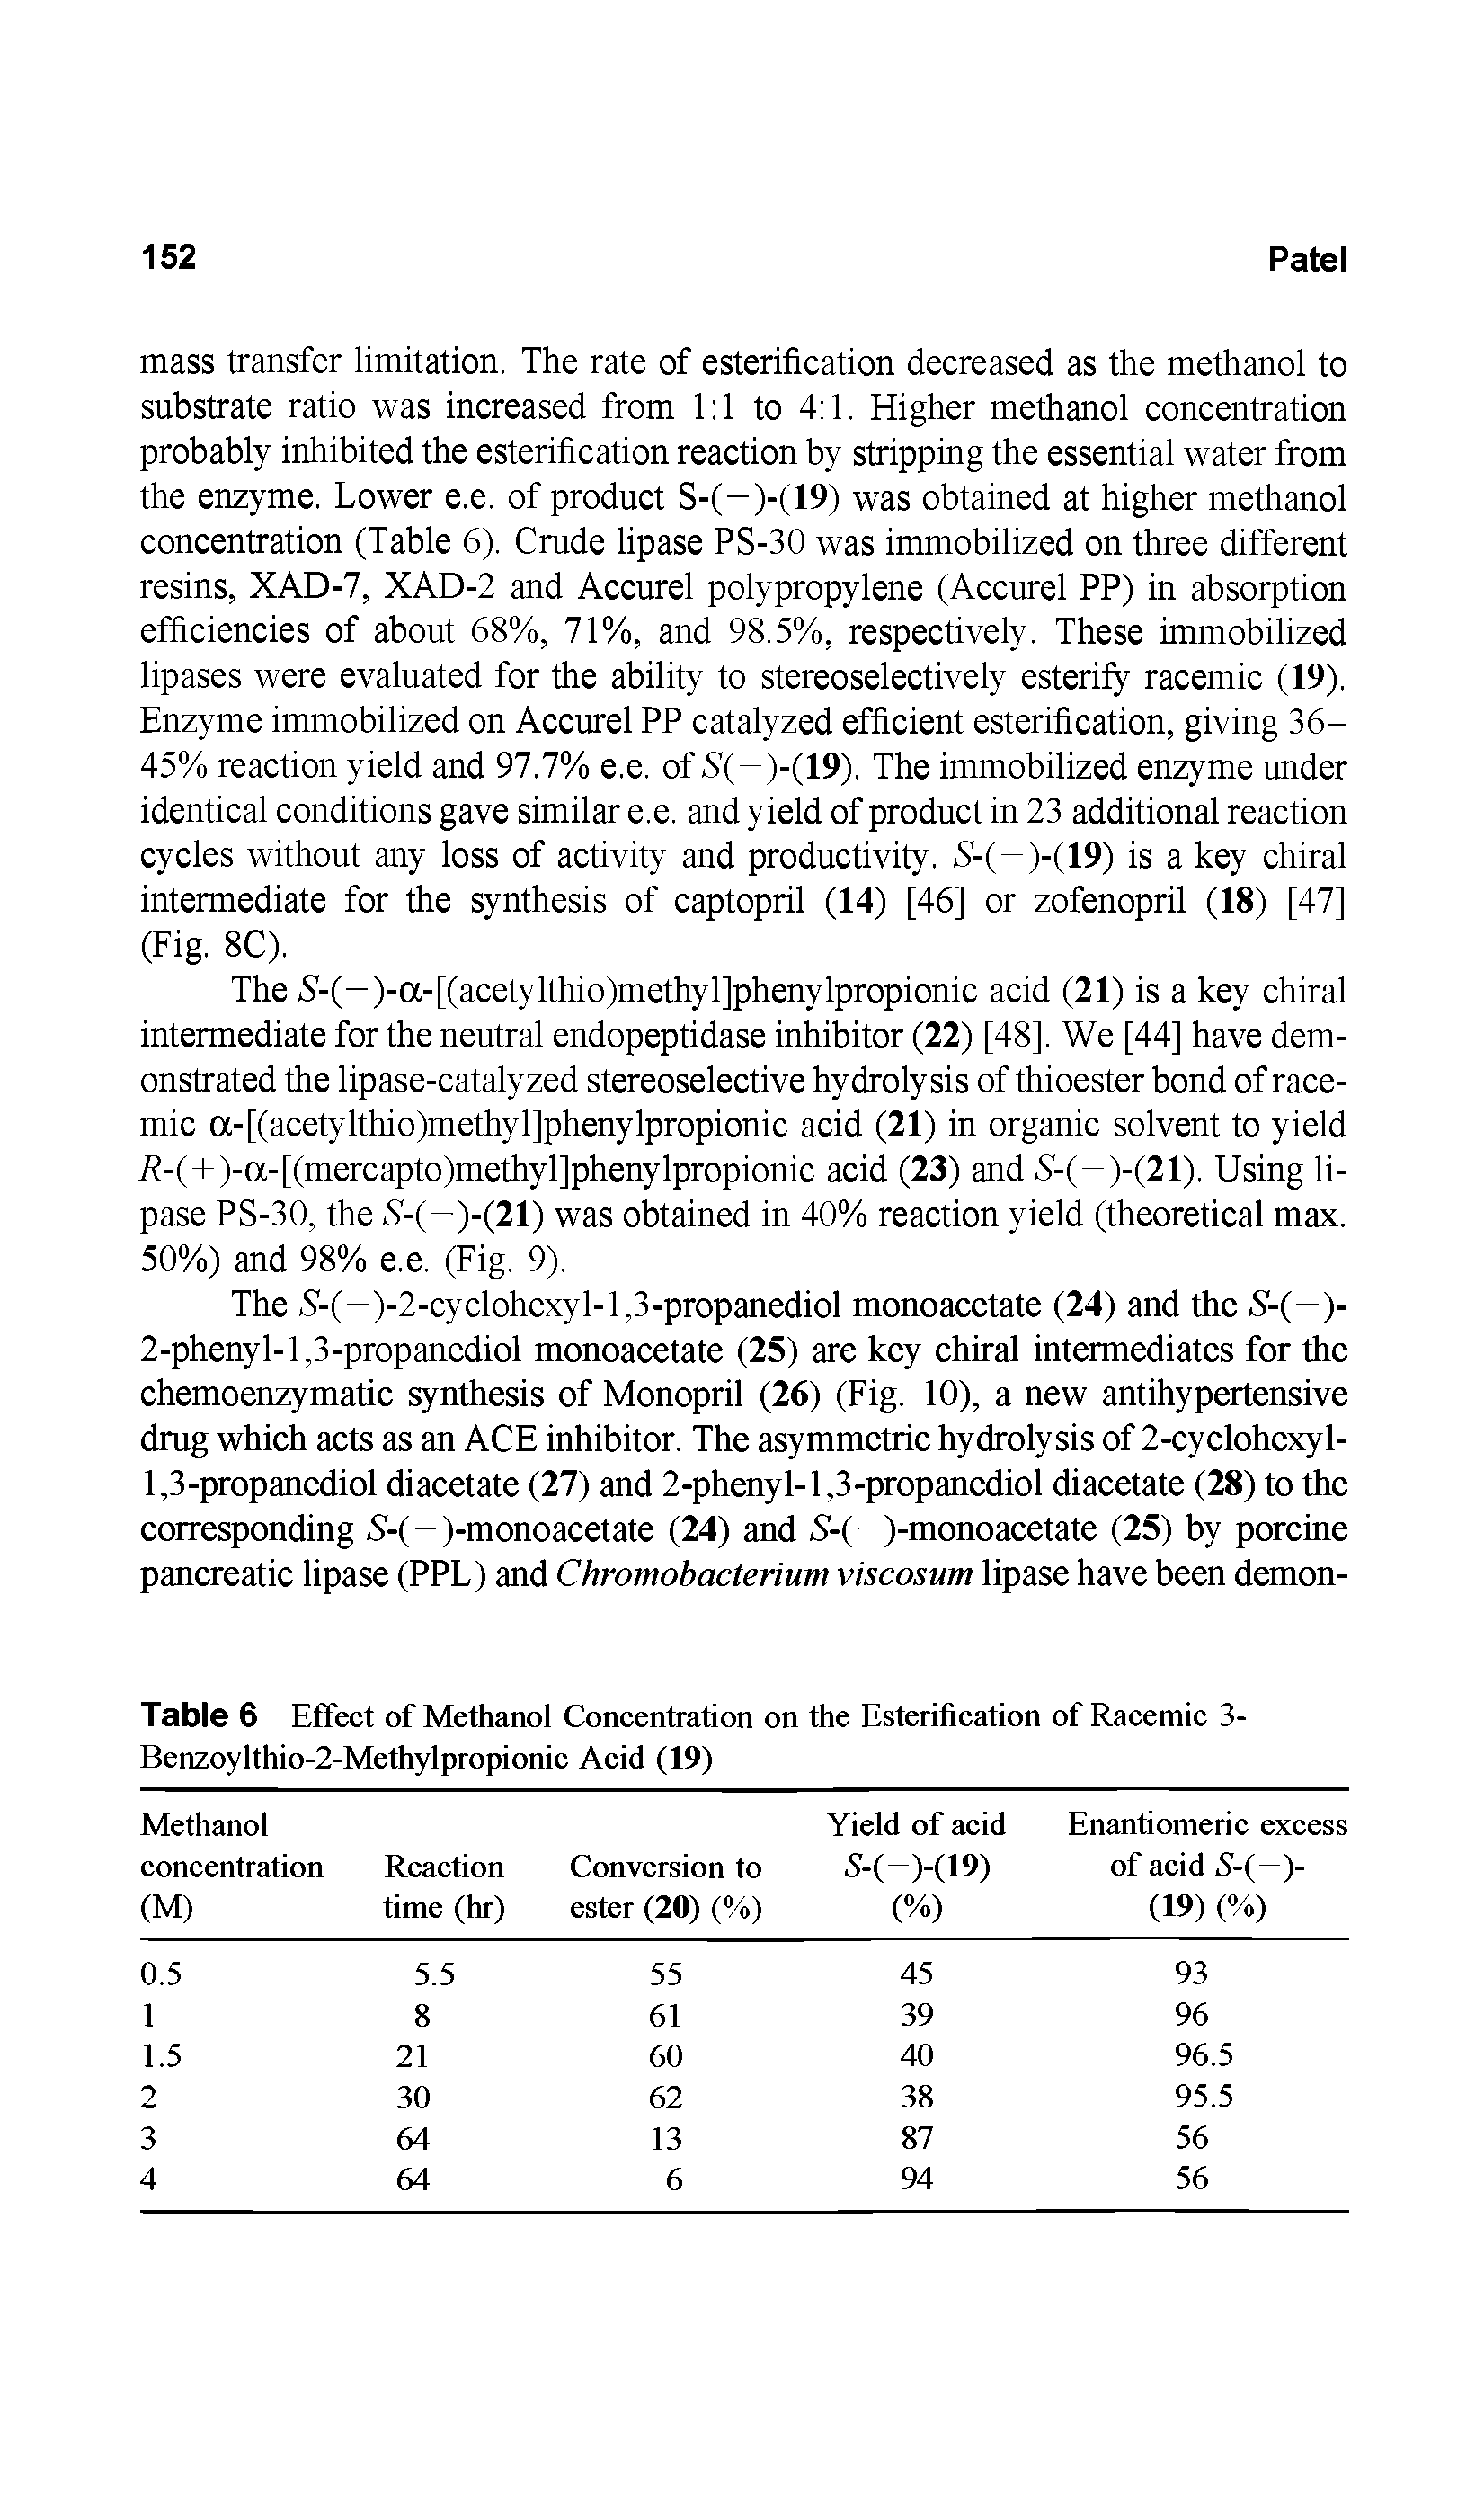 Table 6 Effect of Methanol Concentration on the Esterification of Racemic 3-Benzoylthio-2-Methylpropionic Acid (19)...